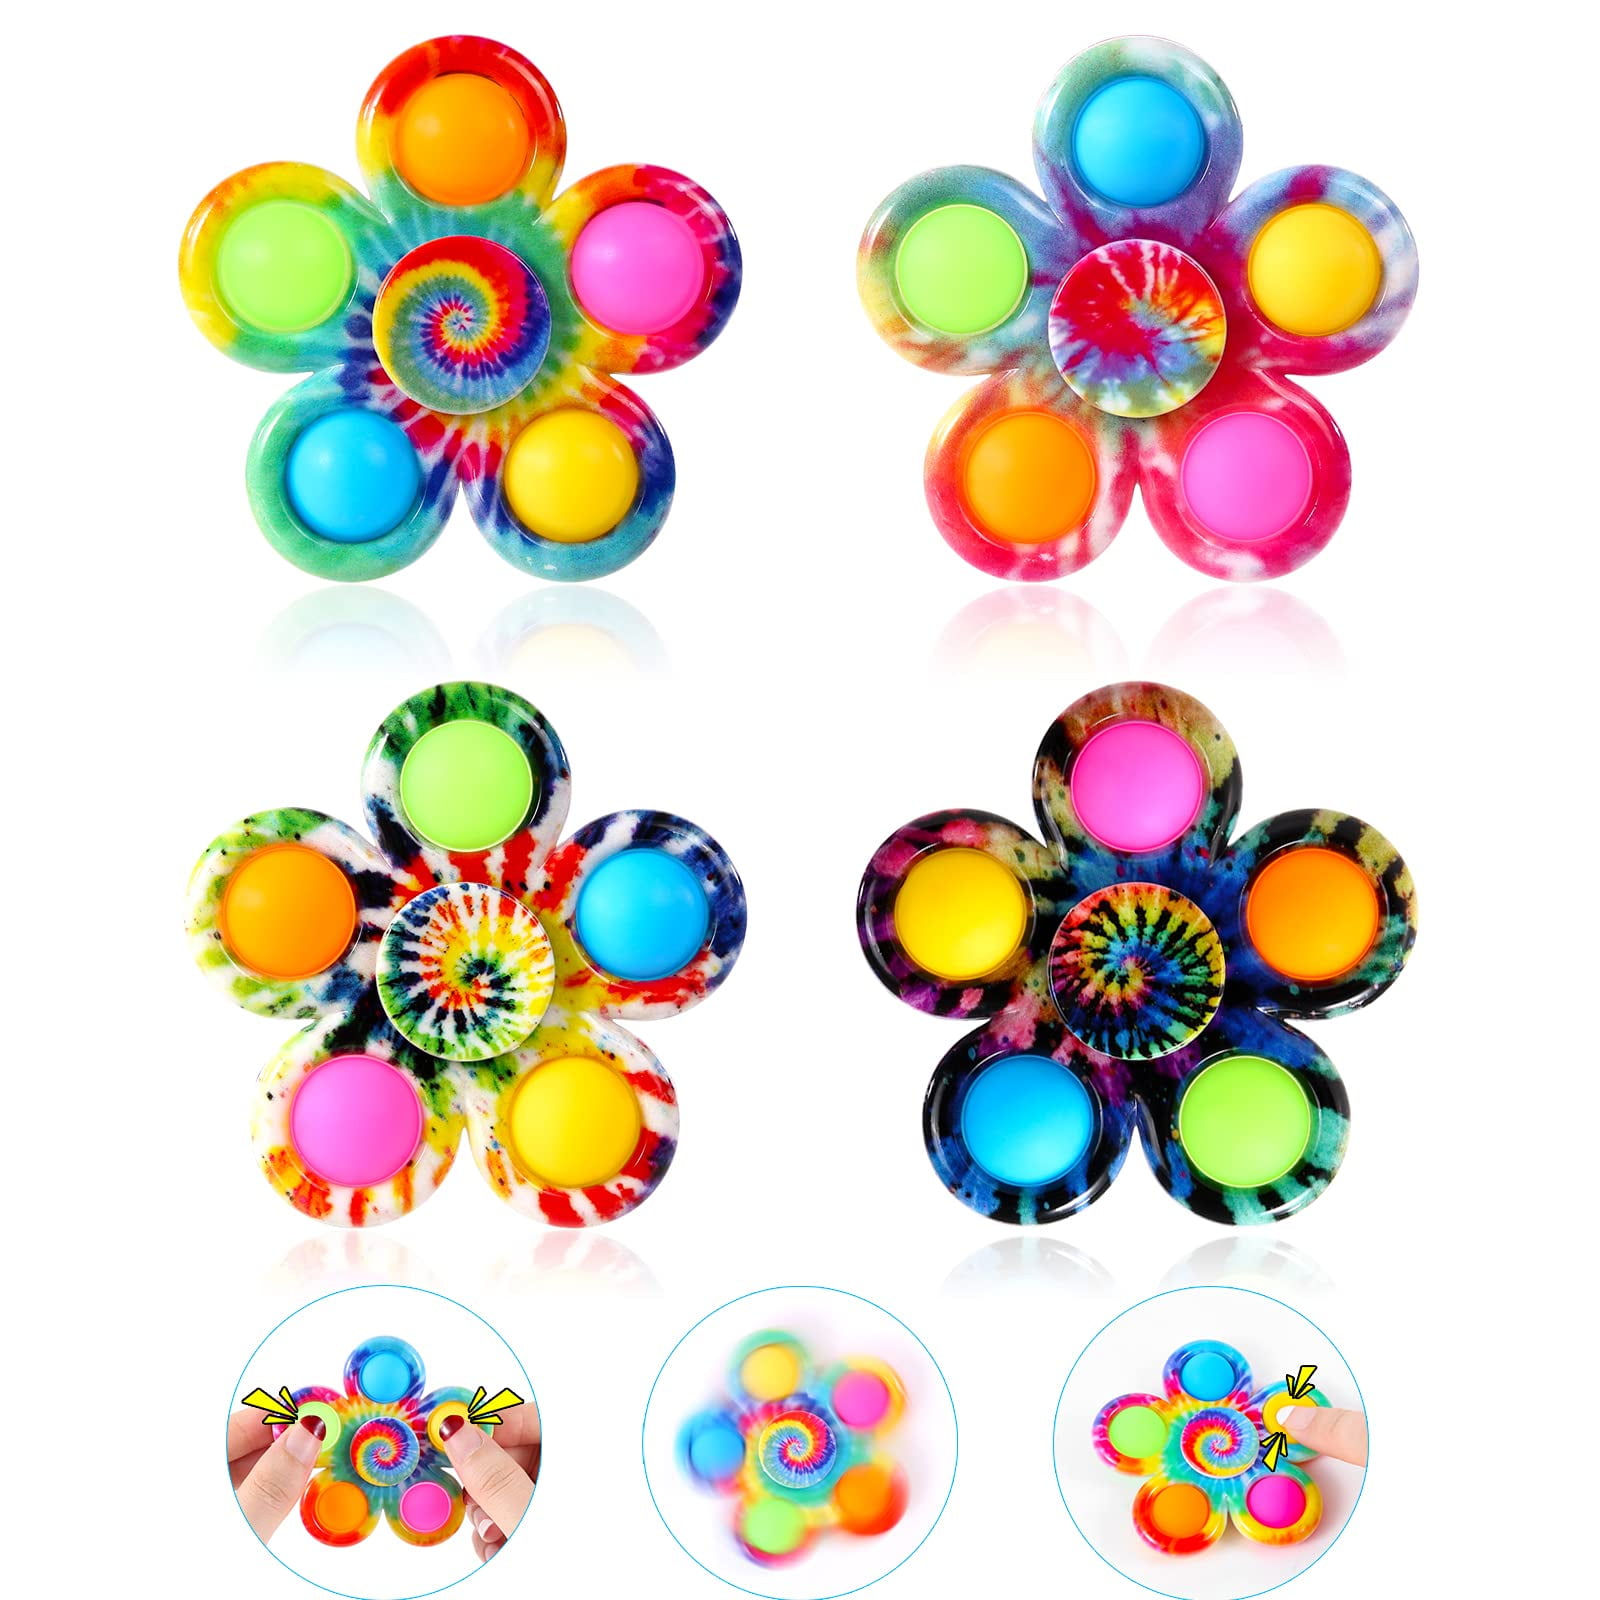 4Pcs Fidget Sensory Toy Snappers Simple Dimple Spinners Stress Relief Grip ADHD 